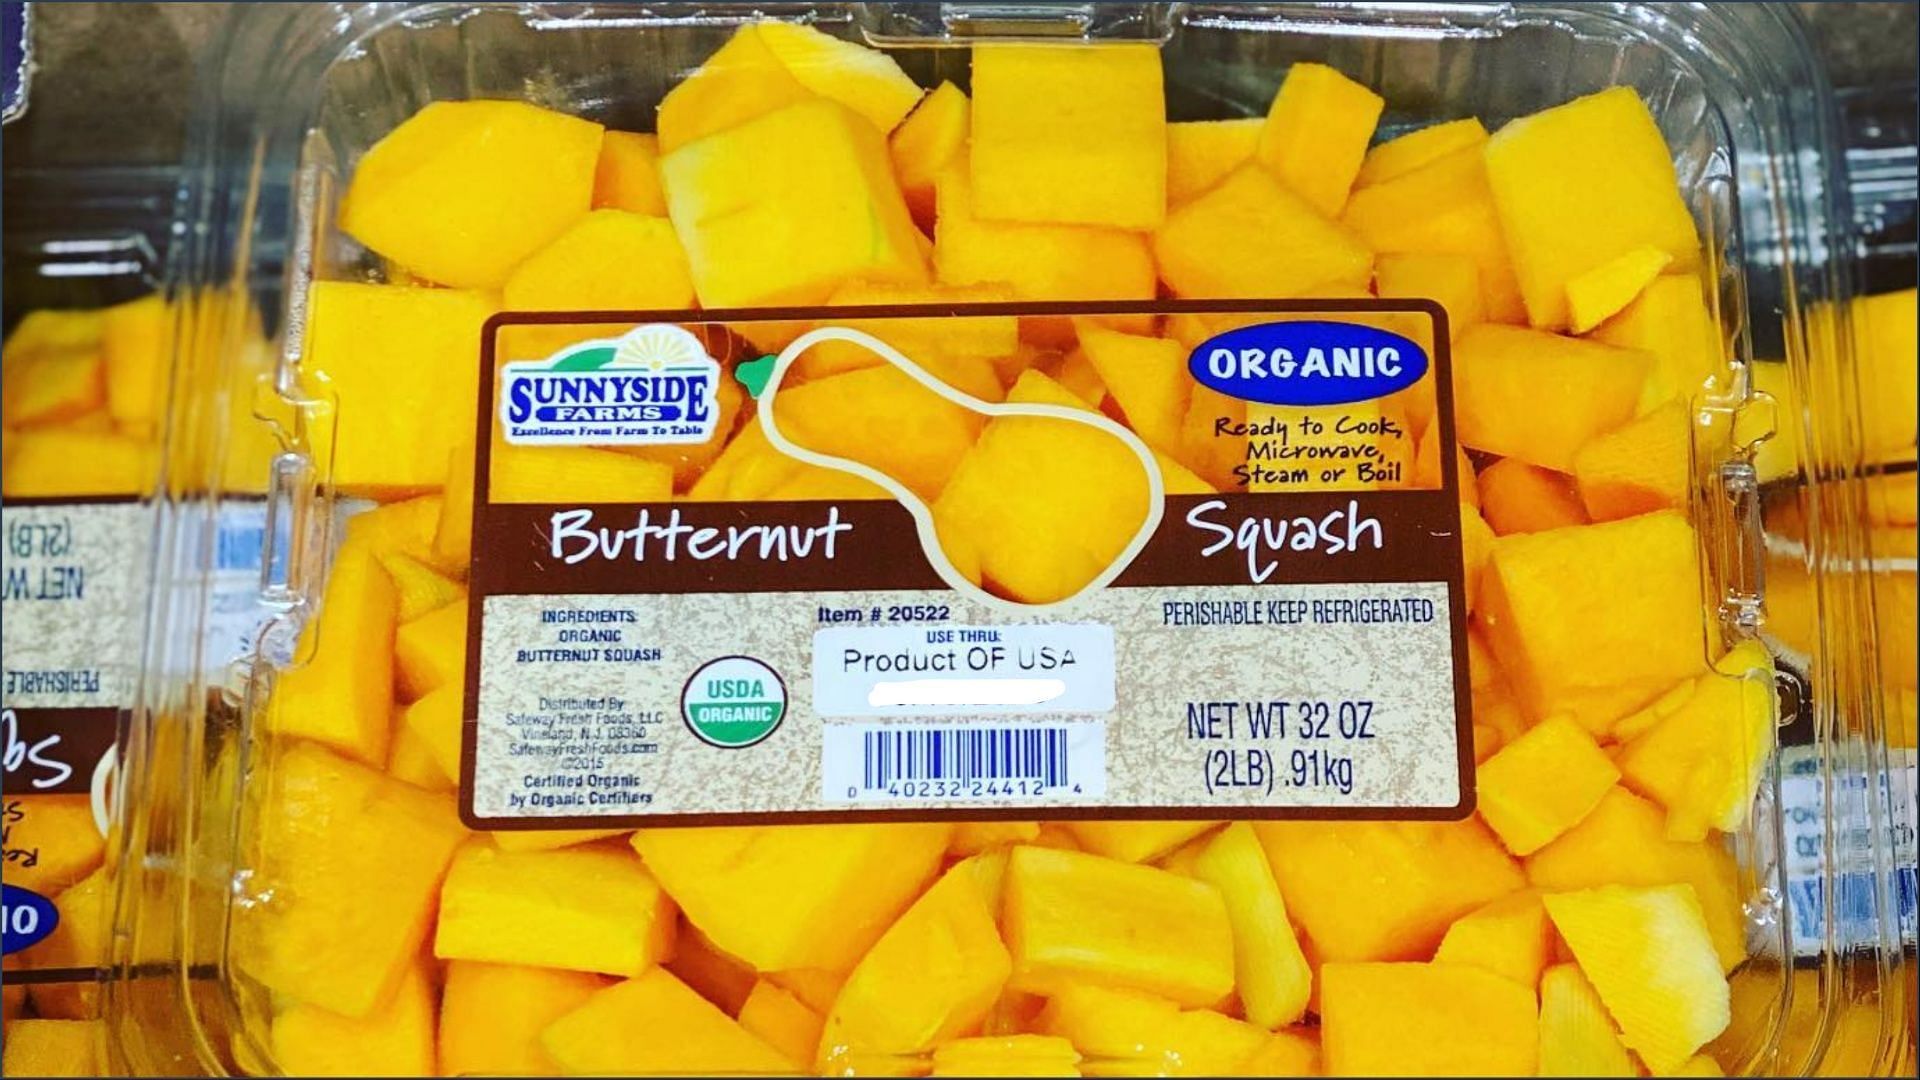 The recalled Costco Butternut Squash products by Safeway Fresh Foods should be returned to a Costco store for a refund (Image via @thecostcoconnoisseur on Instagram)